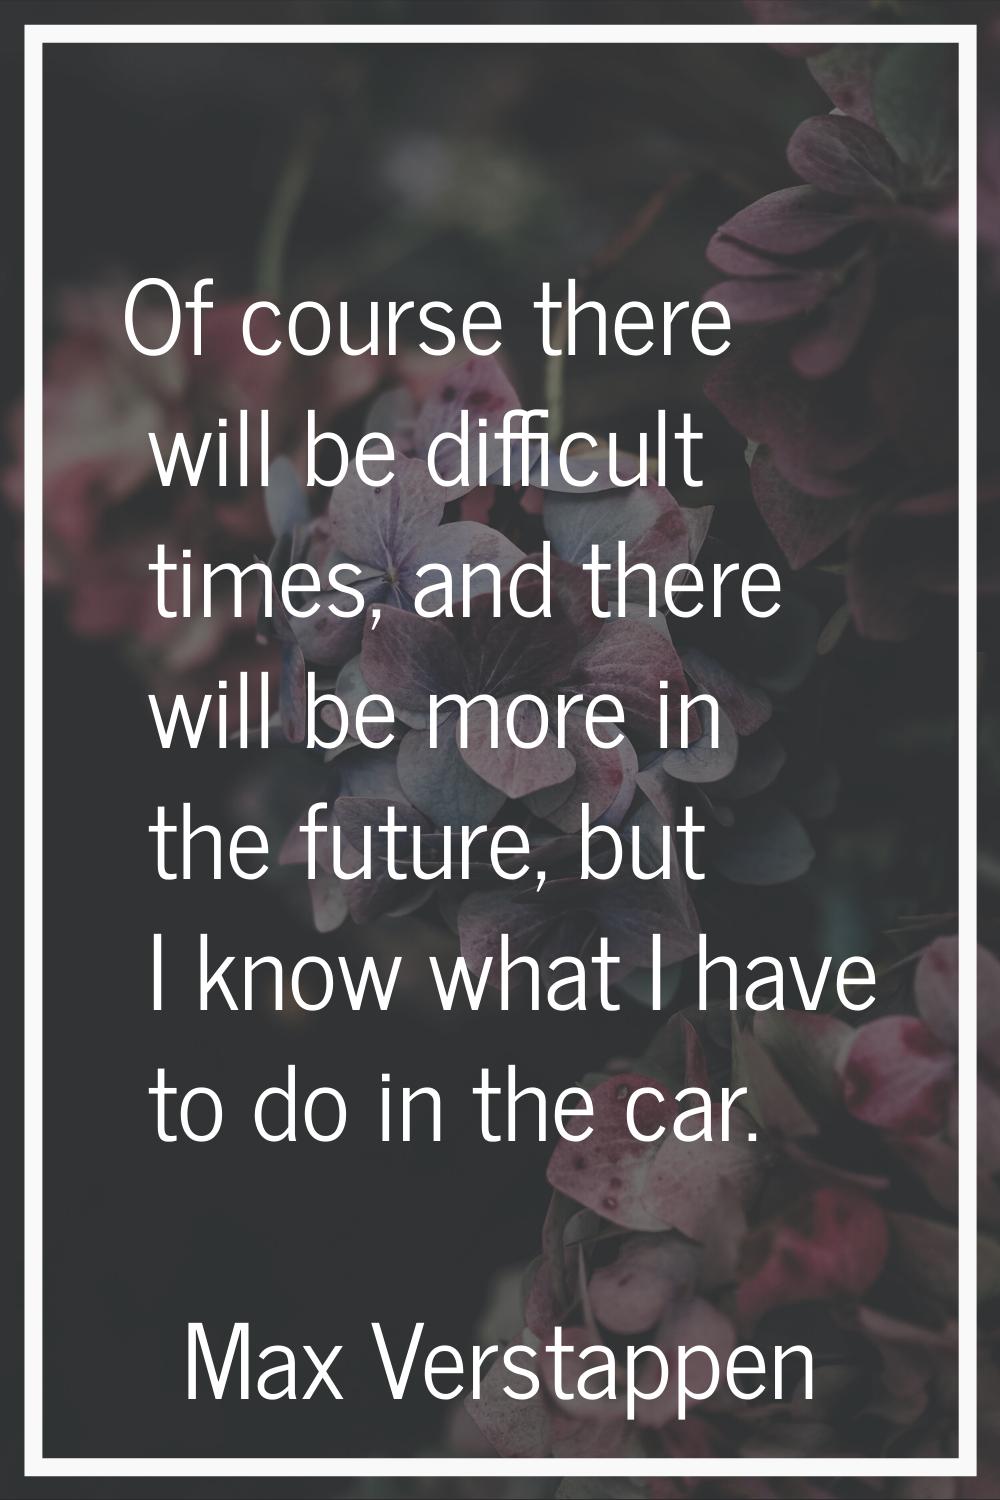 Of course there will be difficult times, and there will be more in the future, but I know what I ha